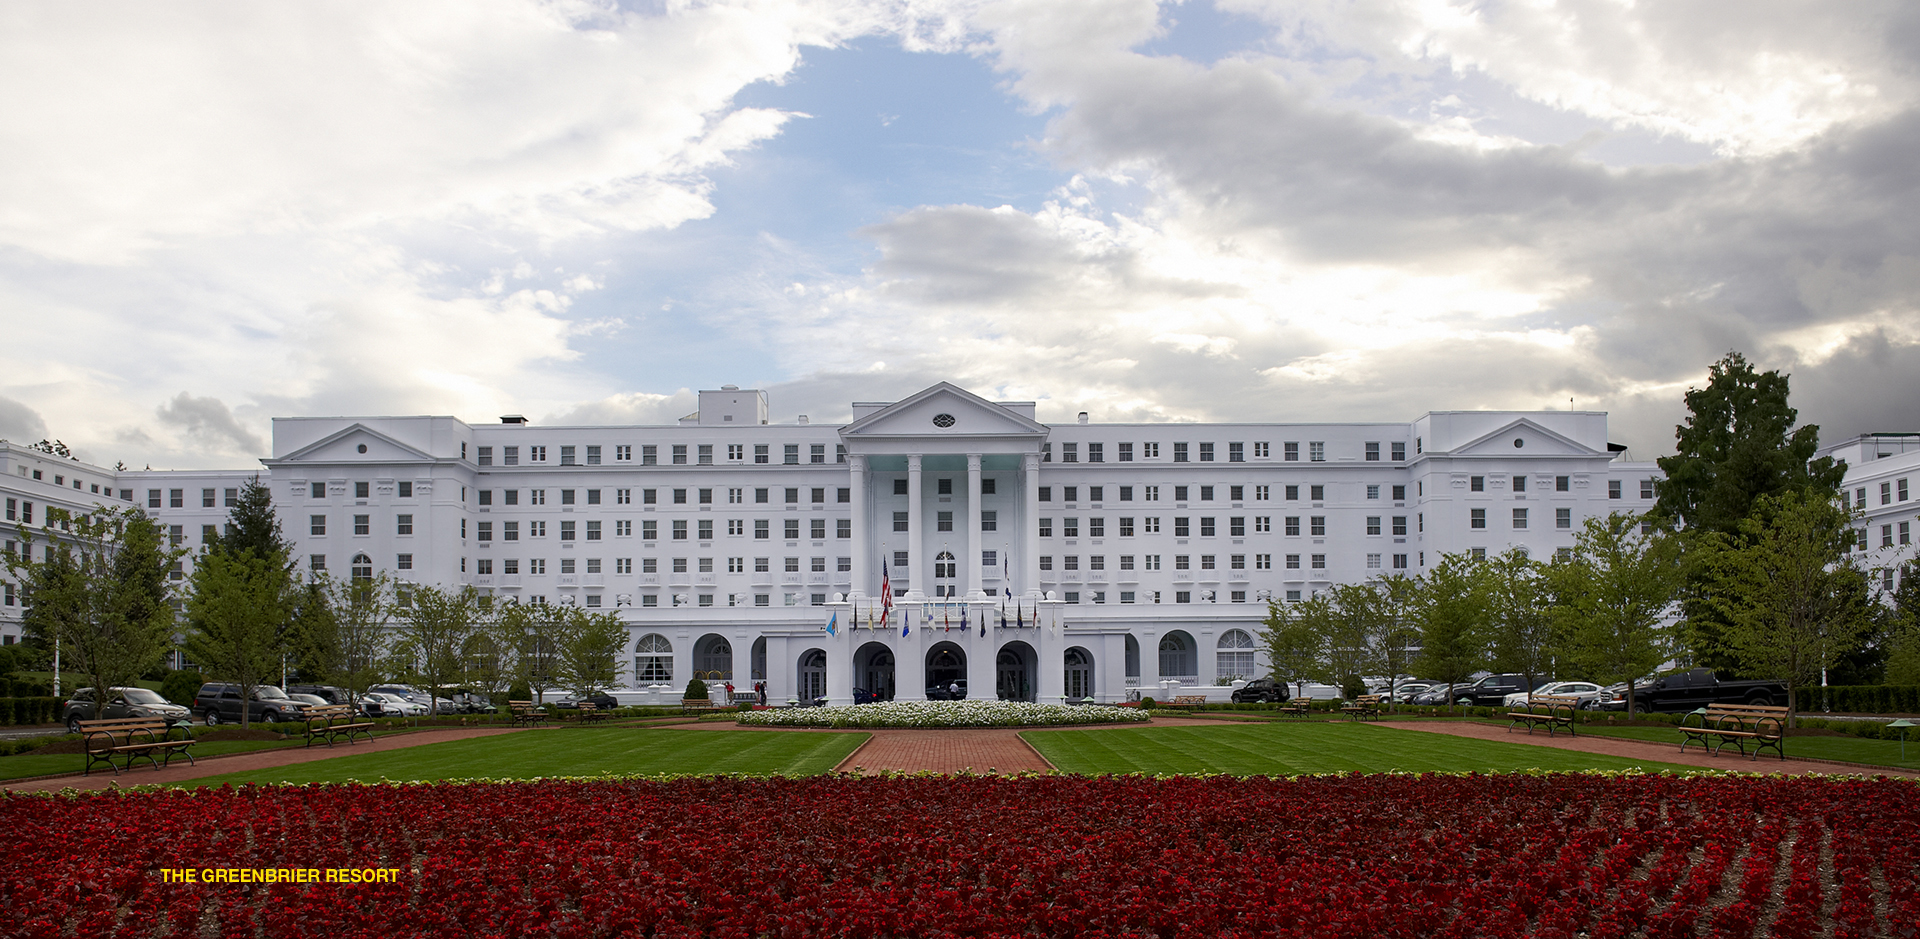 The Greenbrier Hotel.WV : Commercial Projects : MICHEL ARNAUD PHOTOGRAPHY